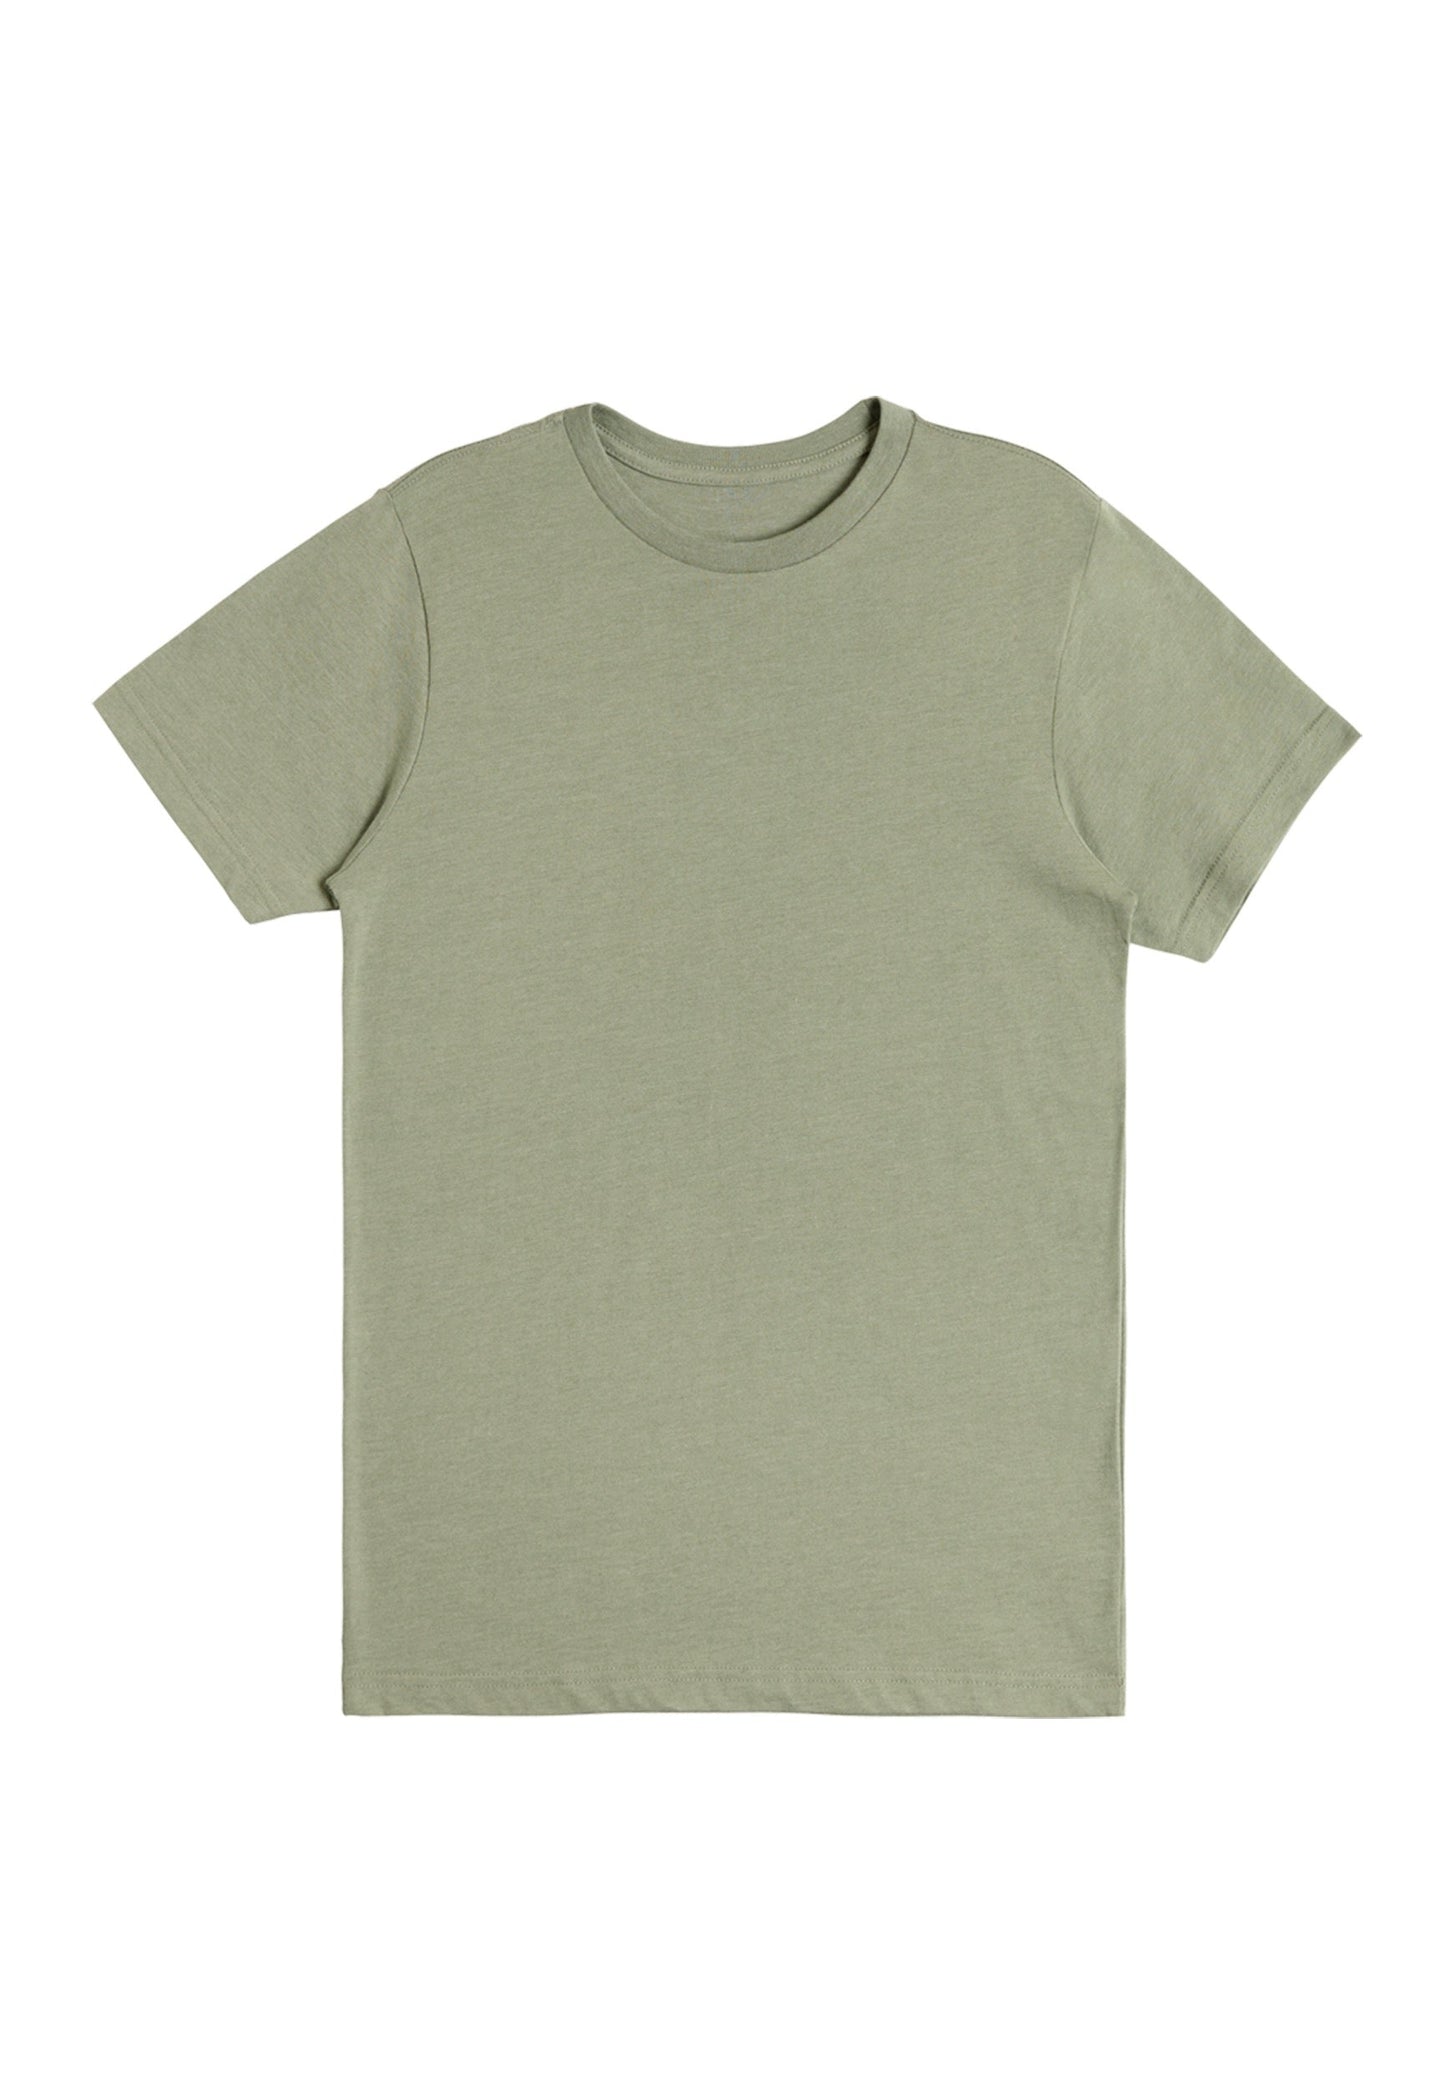 Soft Heather Tees 2-Pack "Olive" and "Black"